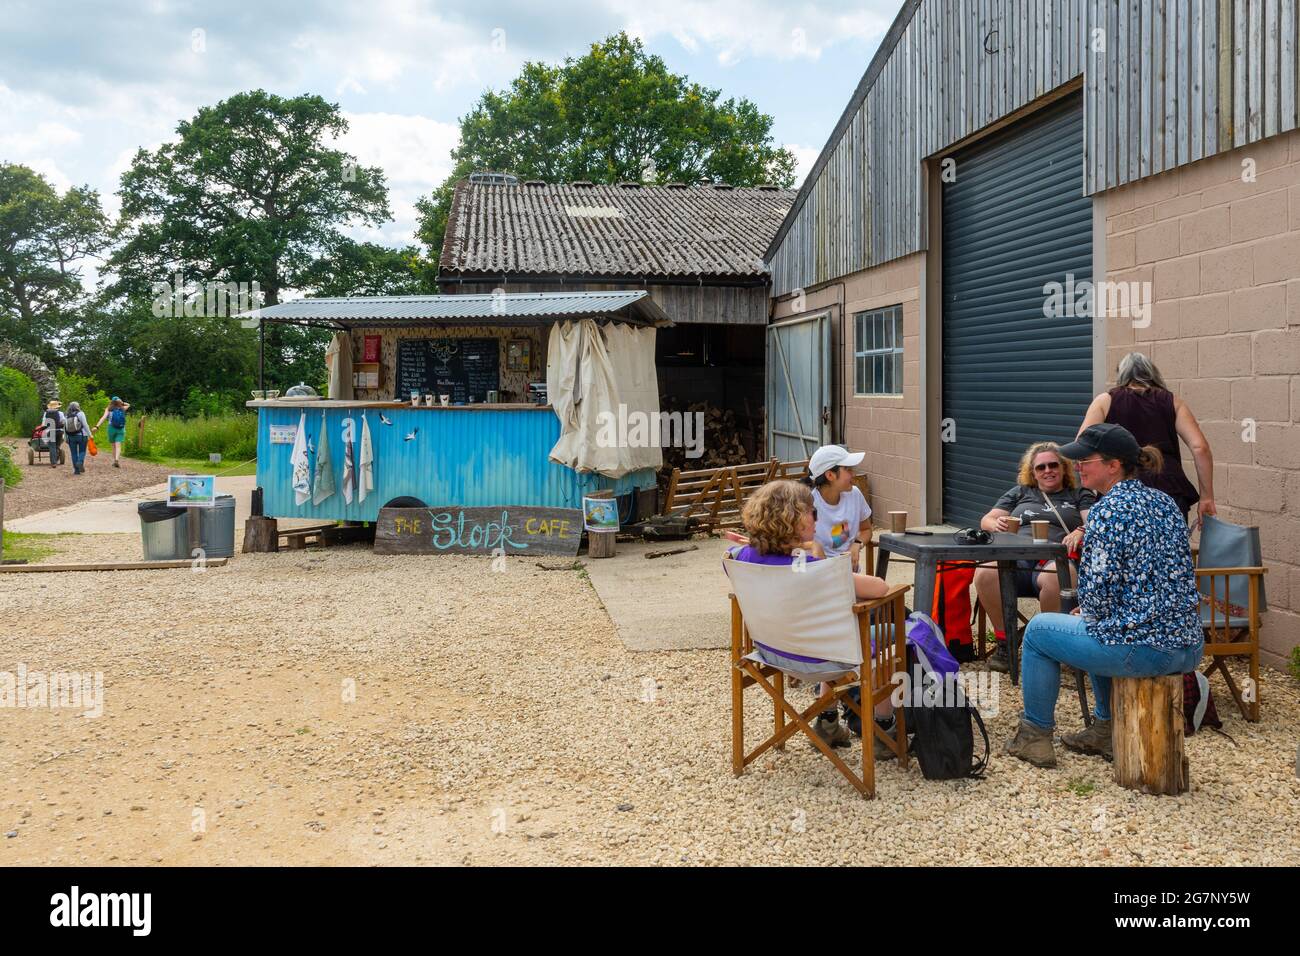 Visitors enjoying refreshments at the Stork Cafe kiosk on the Knepp Estate Wildland rewilding site in West Sussex, England, UK, during summer Stock Photo